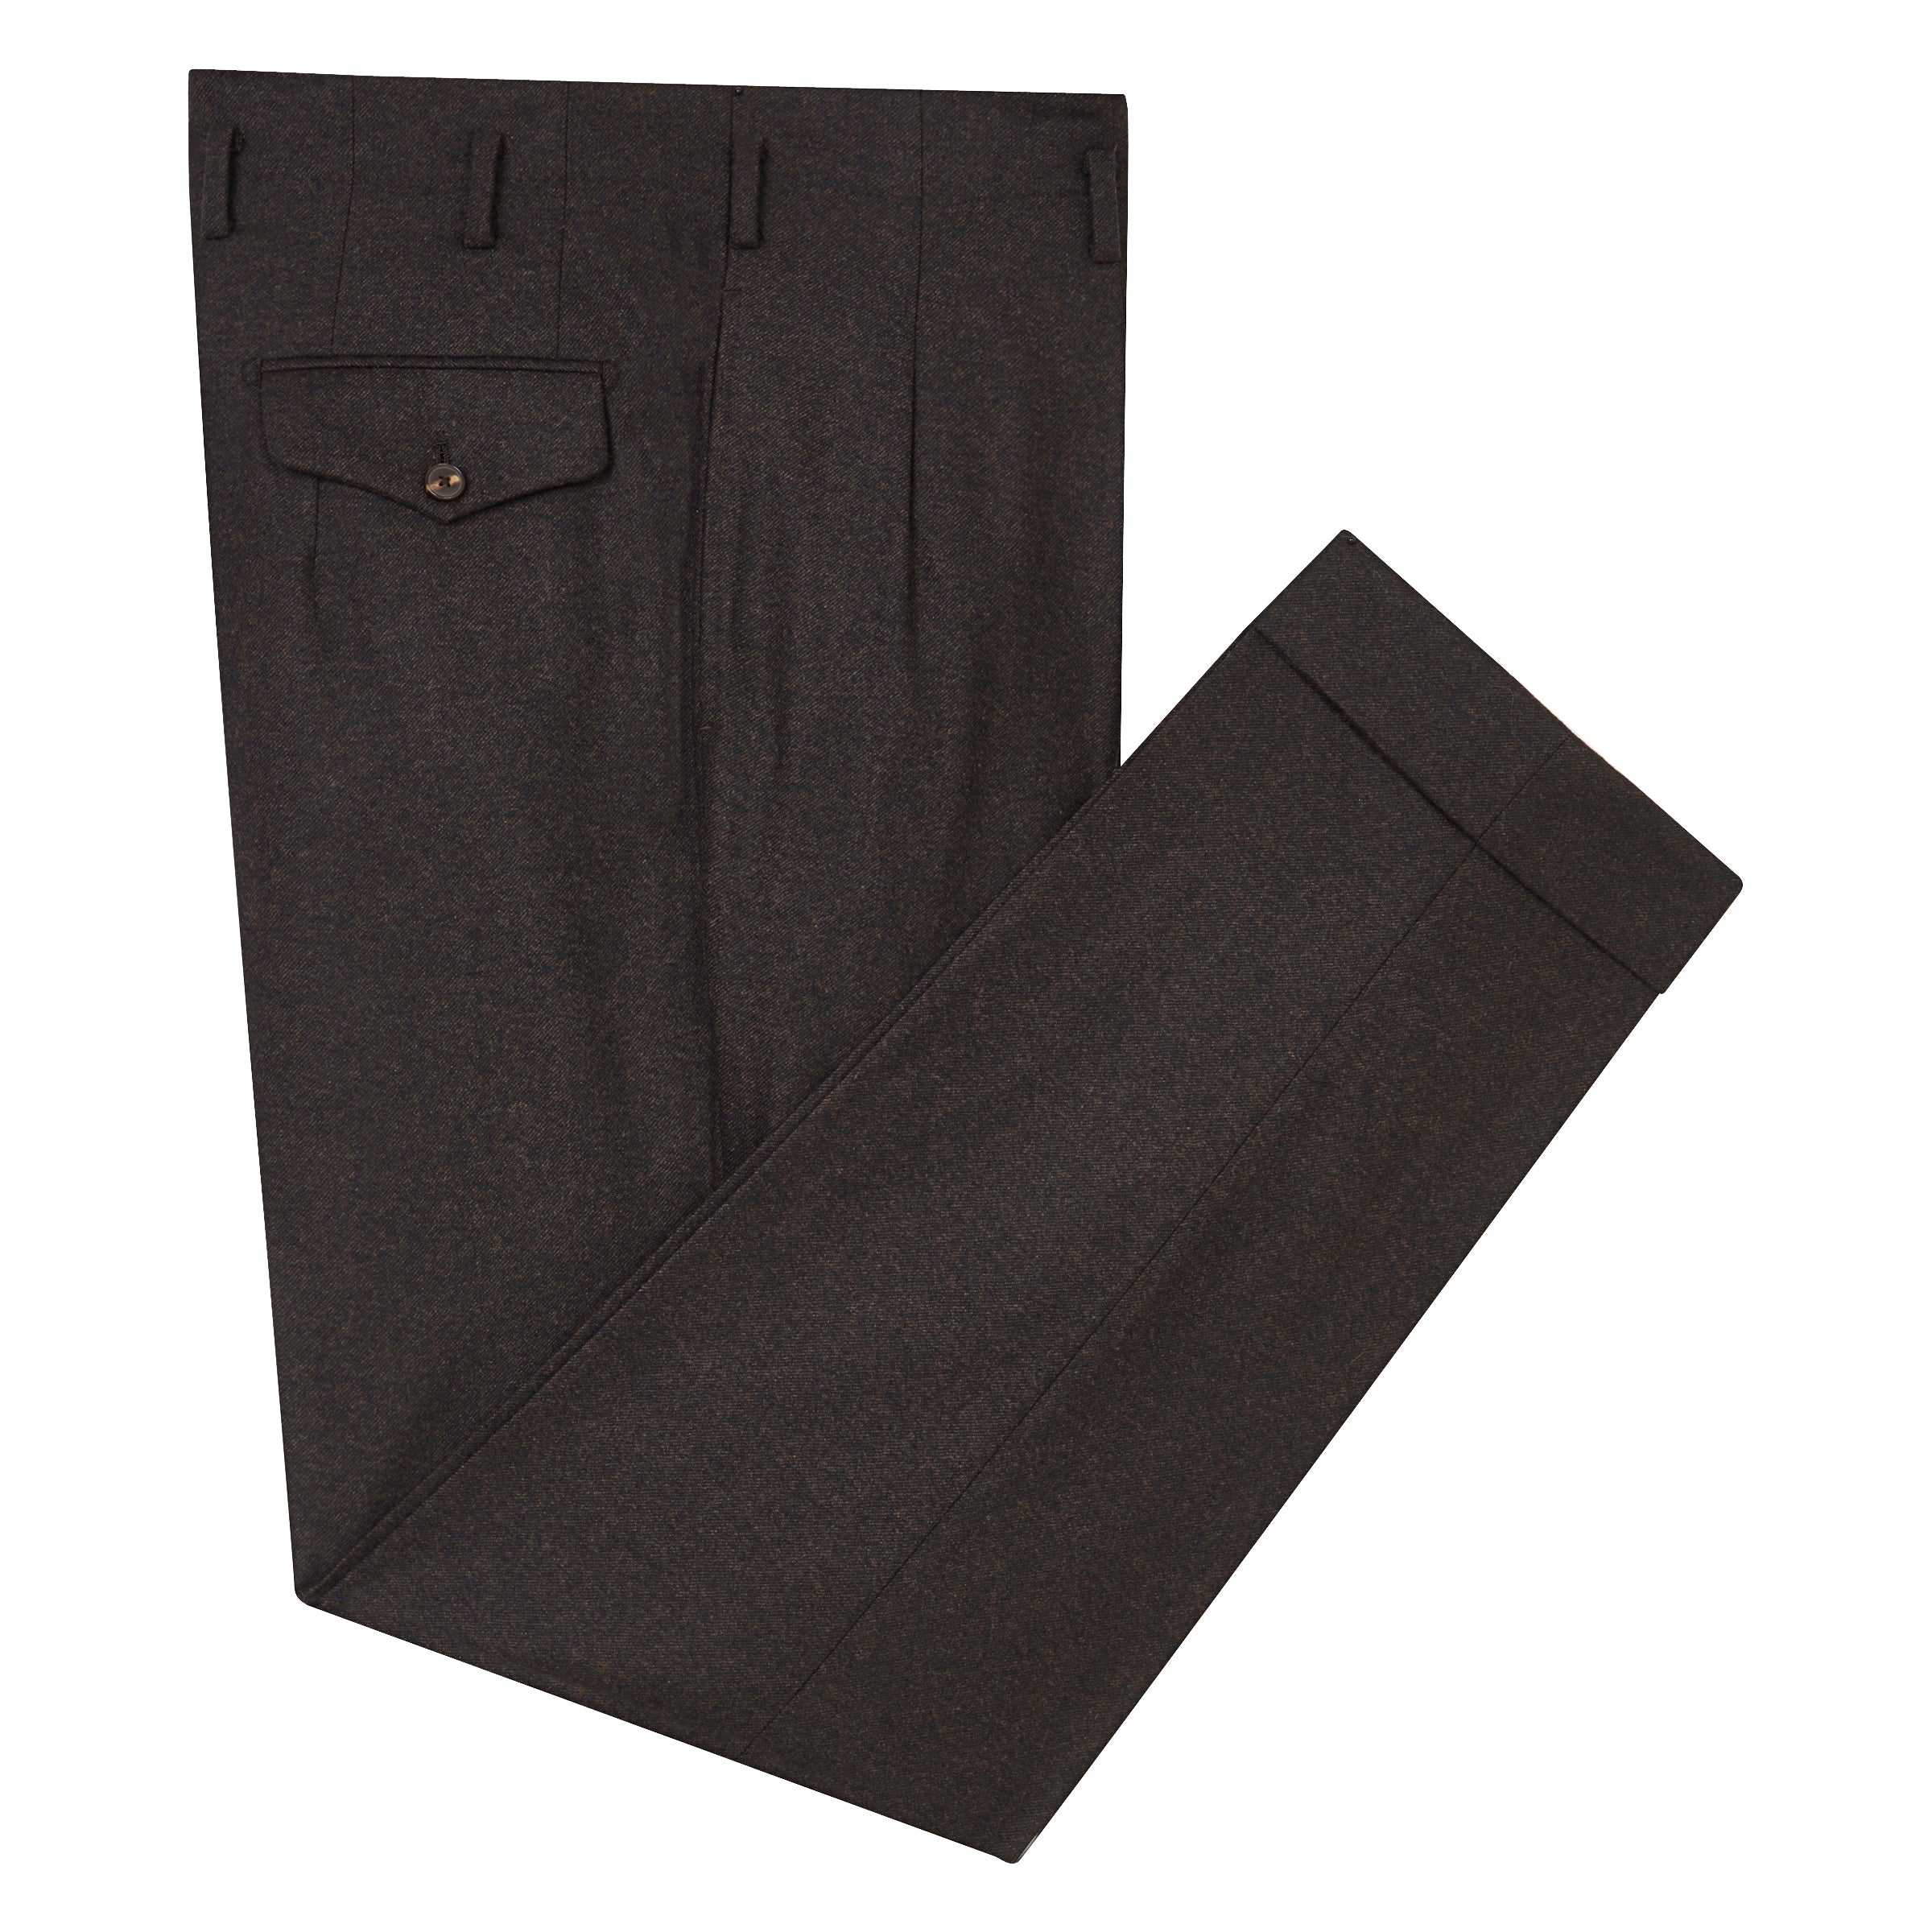 Brown Corduroy Hollywood Trousers